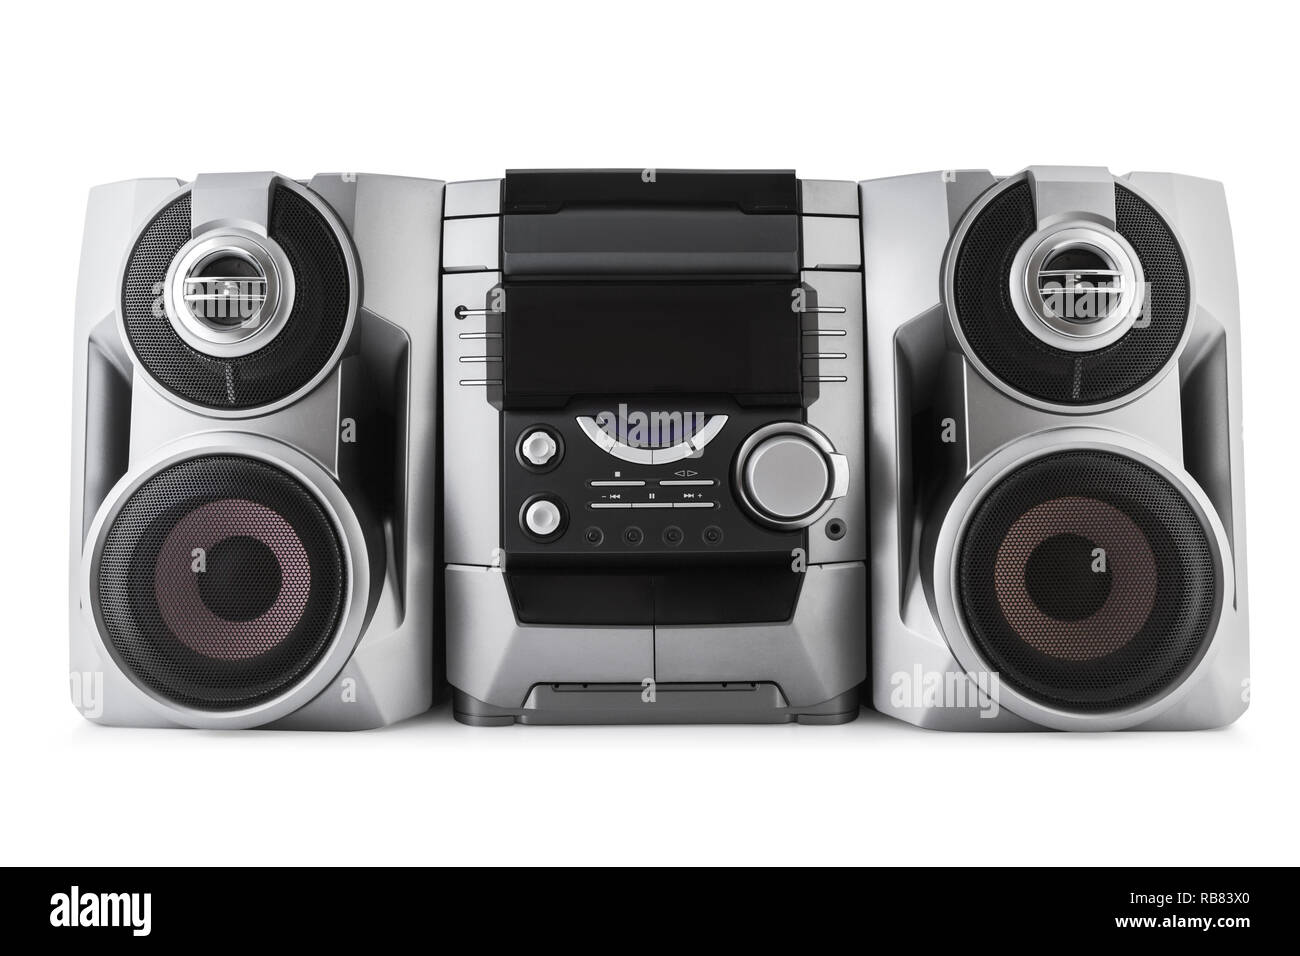 Compact stereo system cd and cassette player isolated with clipping path on white background. Stock Photo